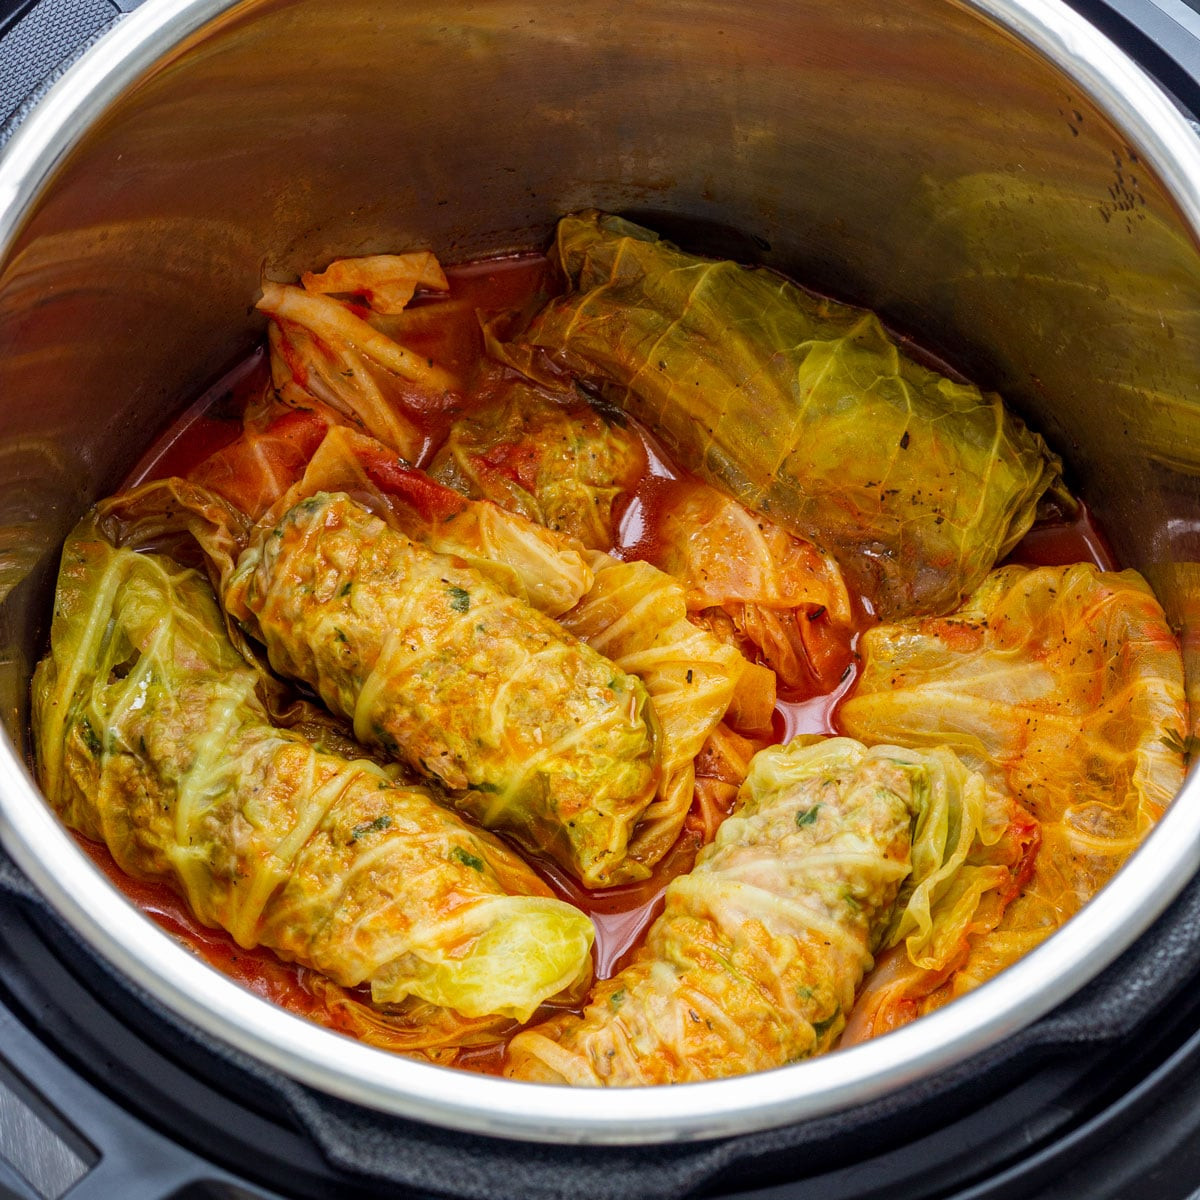 Cabbage In Instant Pot
 Instant Pot Stuffed Cabbage Rolls Pressure Cooker